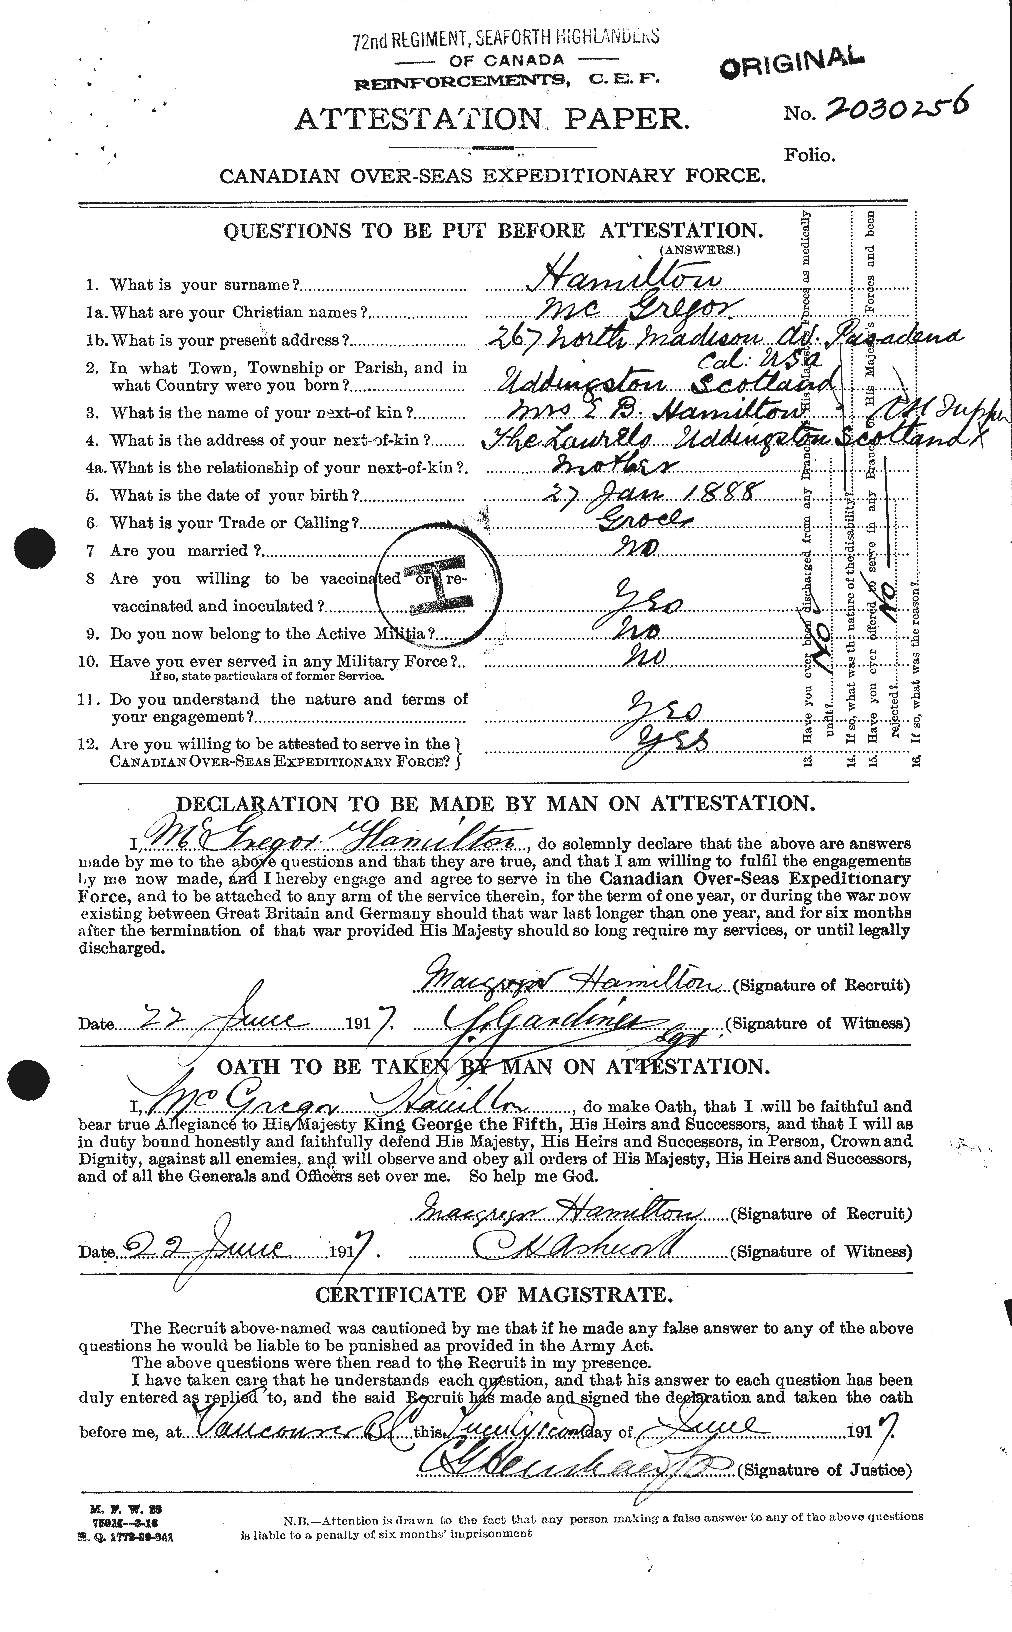 Personnel Records of the First World War - CEF 373180a